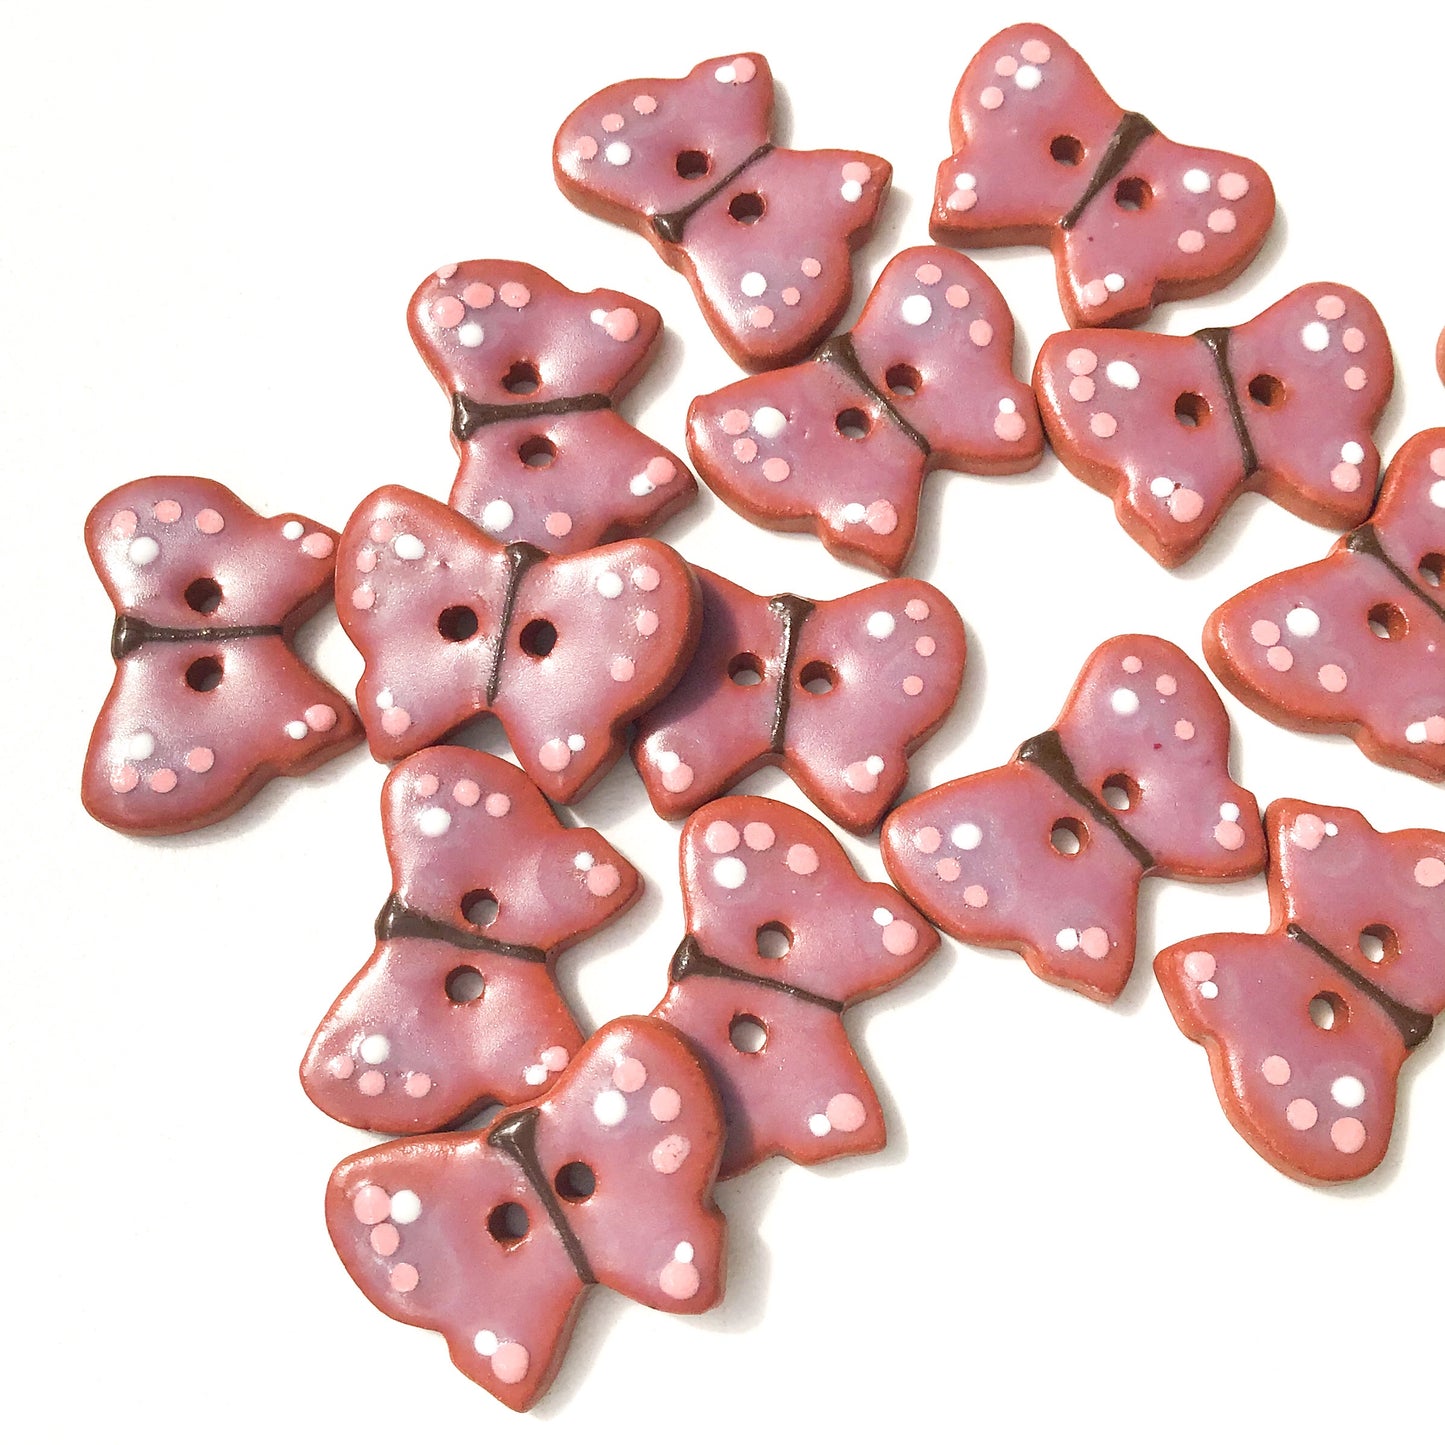 Ceramic Butterfly Buttons - Purple+Pink+White Butterfly Buttons - 5/8" x 7/8"